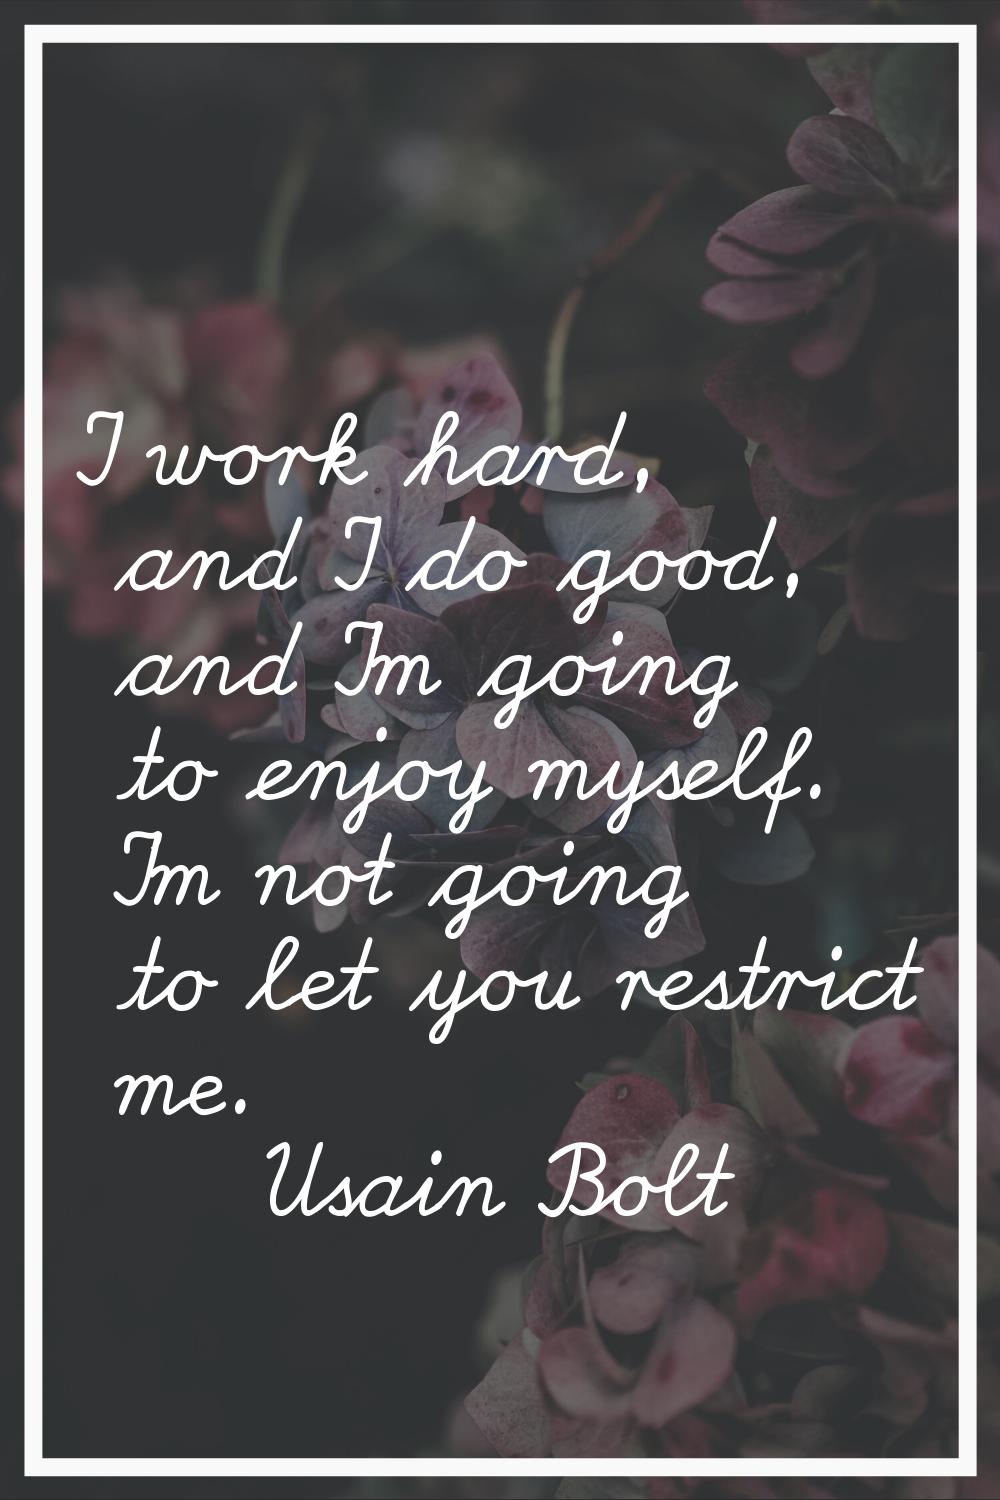 I work hard, and I do good, and I'm going to enjoy myself. I'm not going to let you restrict me.